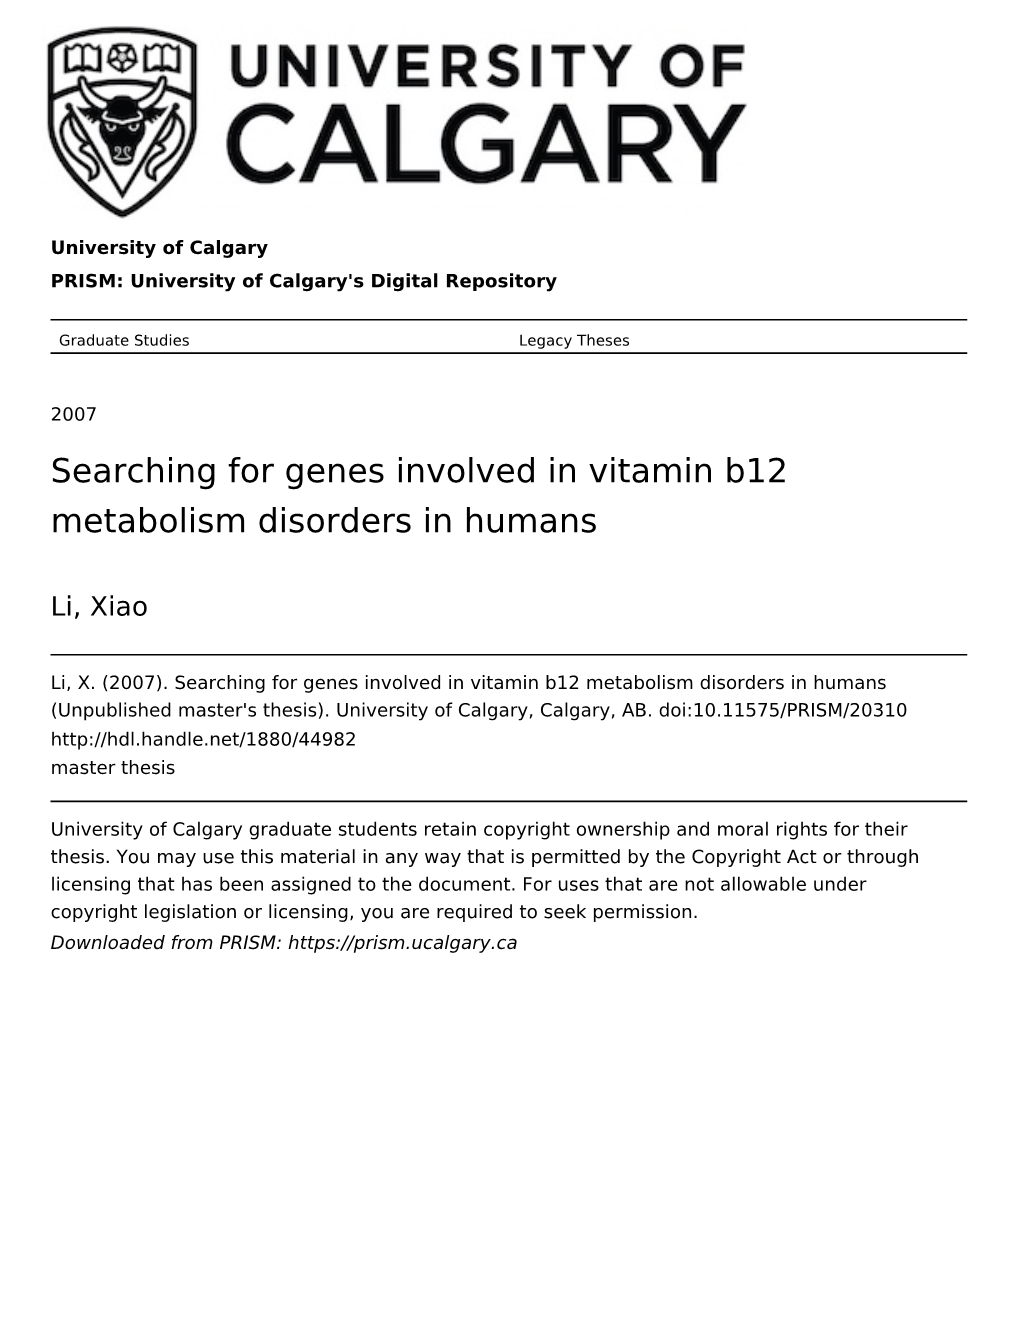 Searching for Genes Involved in Vitamin B12 Metabolism Disorders in Humans